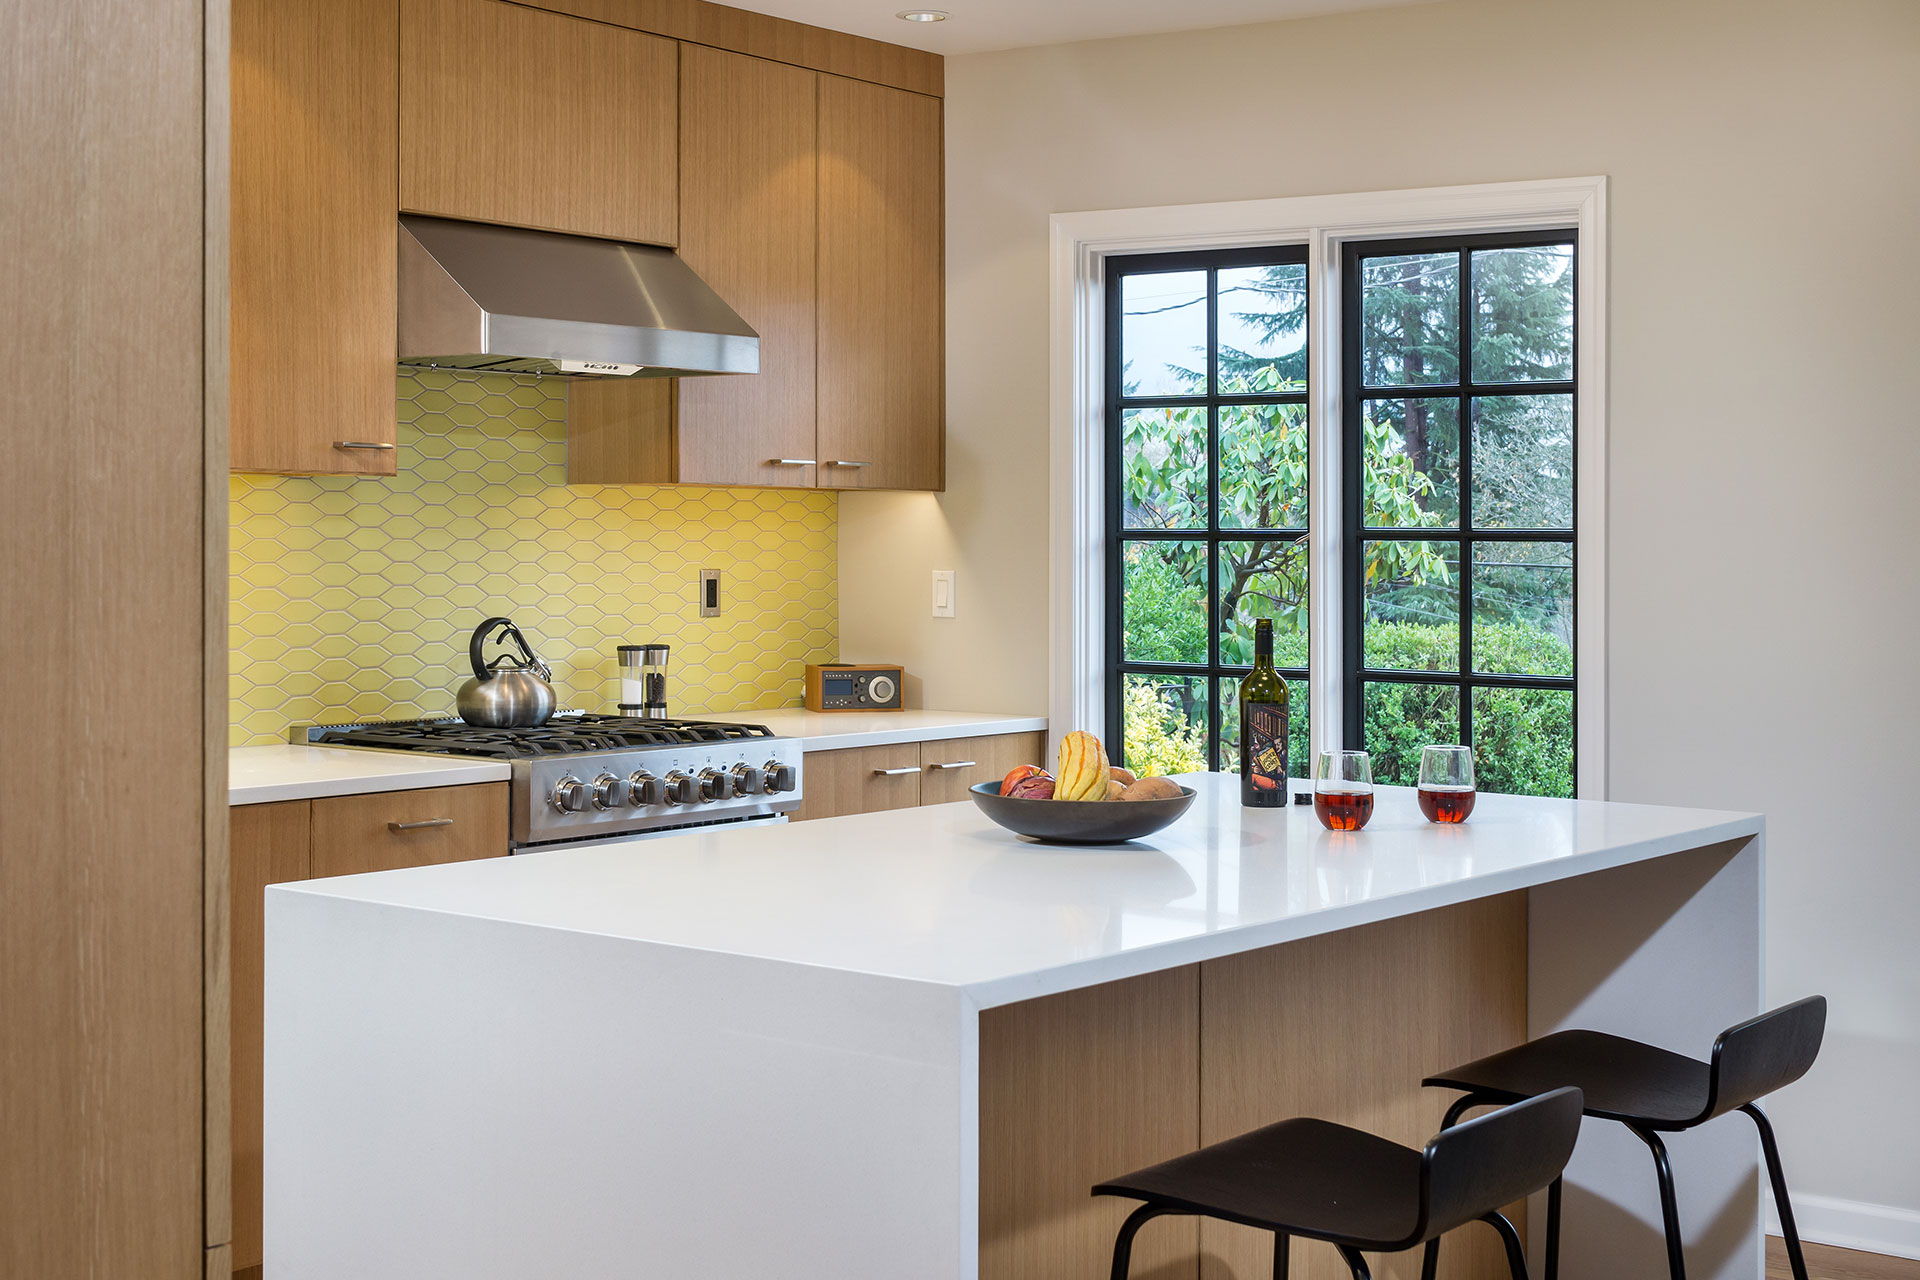 At the Alameda Modern, the kitchen island features quartz countertops with a waterfall edge.